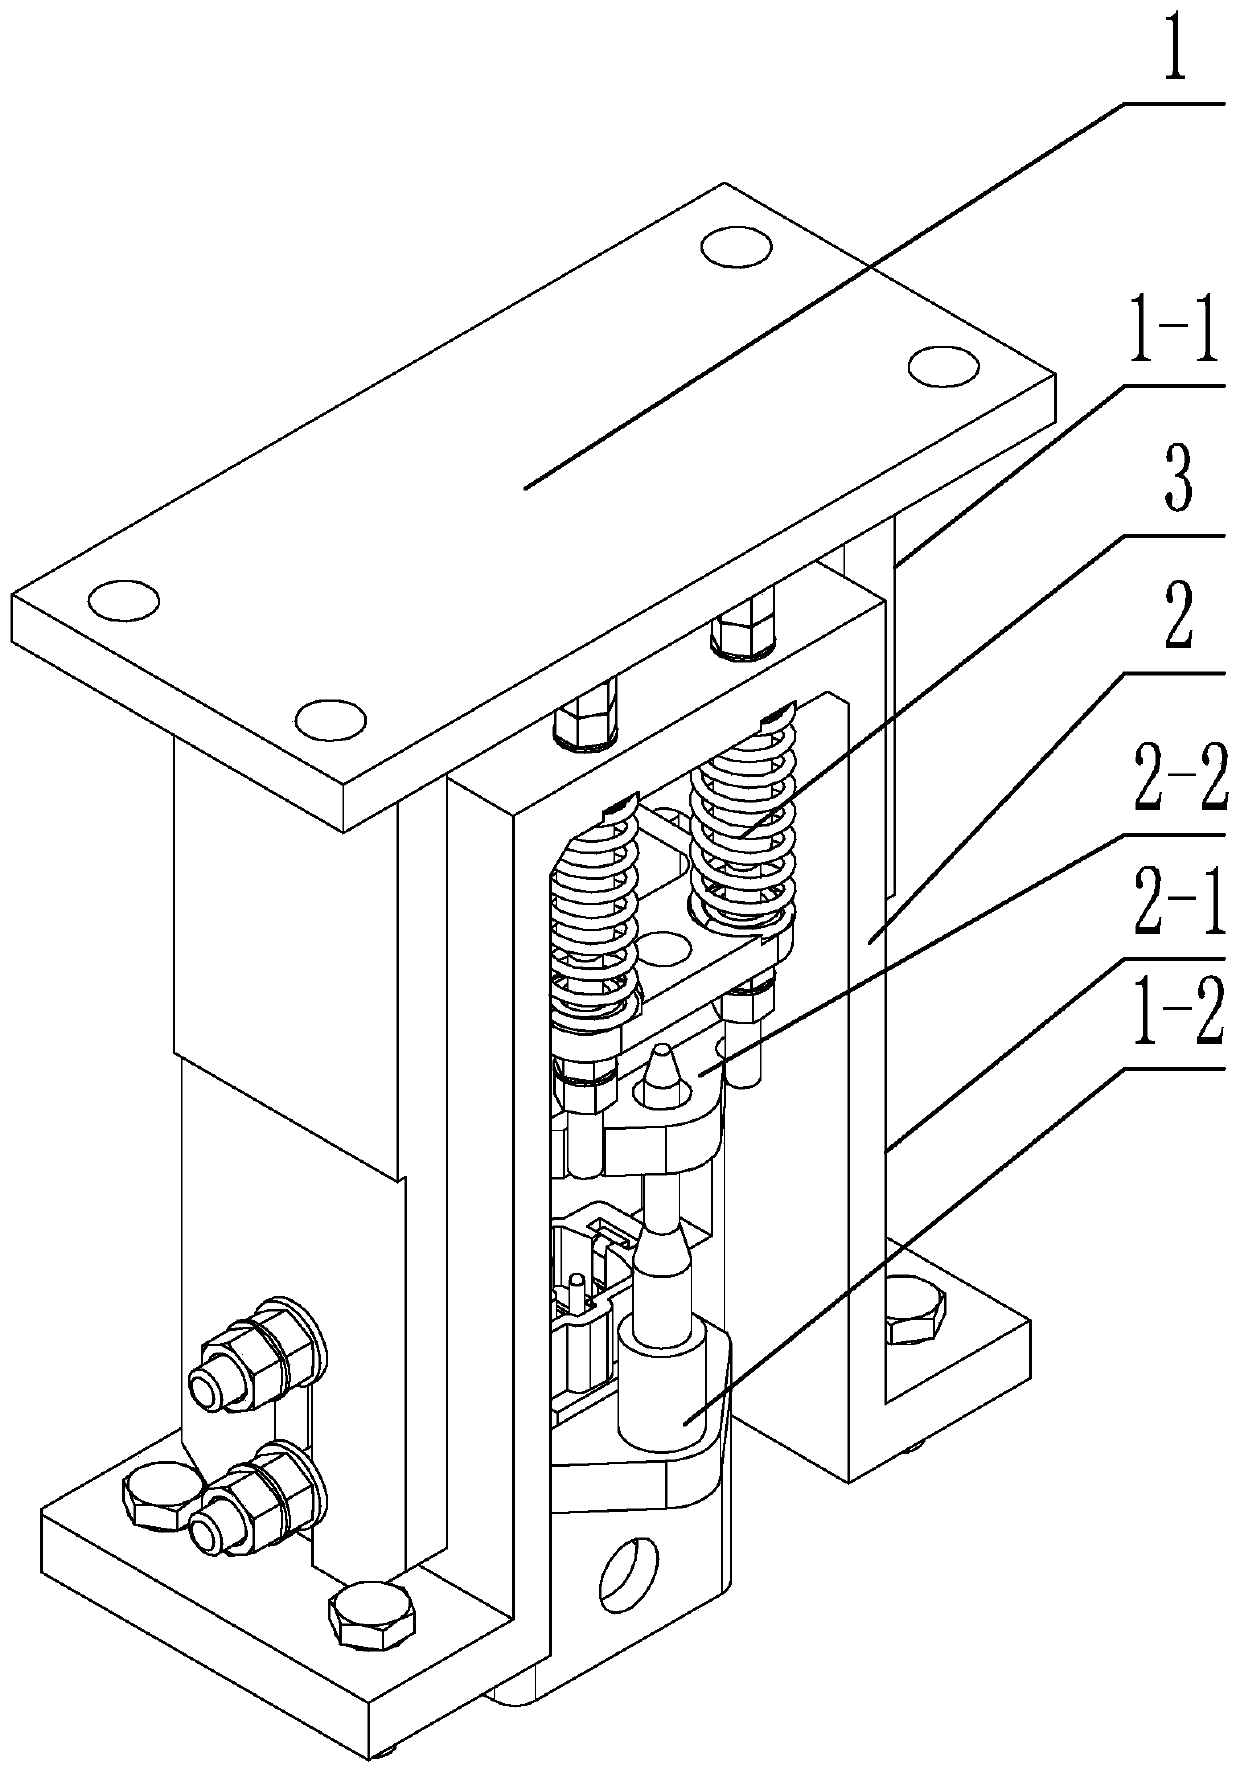 An automatic cable plugging and unplugging device for mass centroid measurement